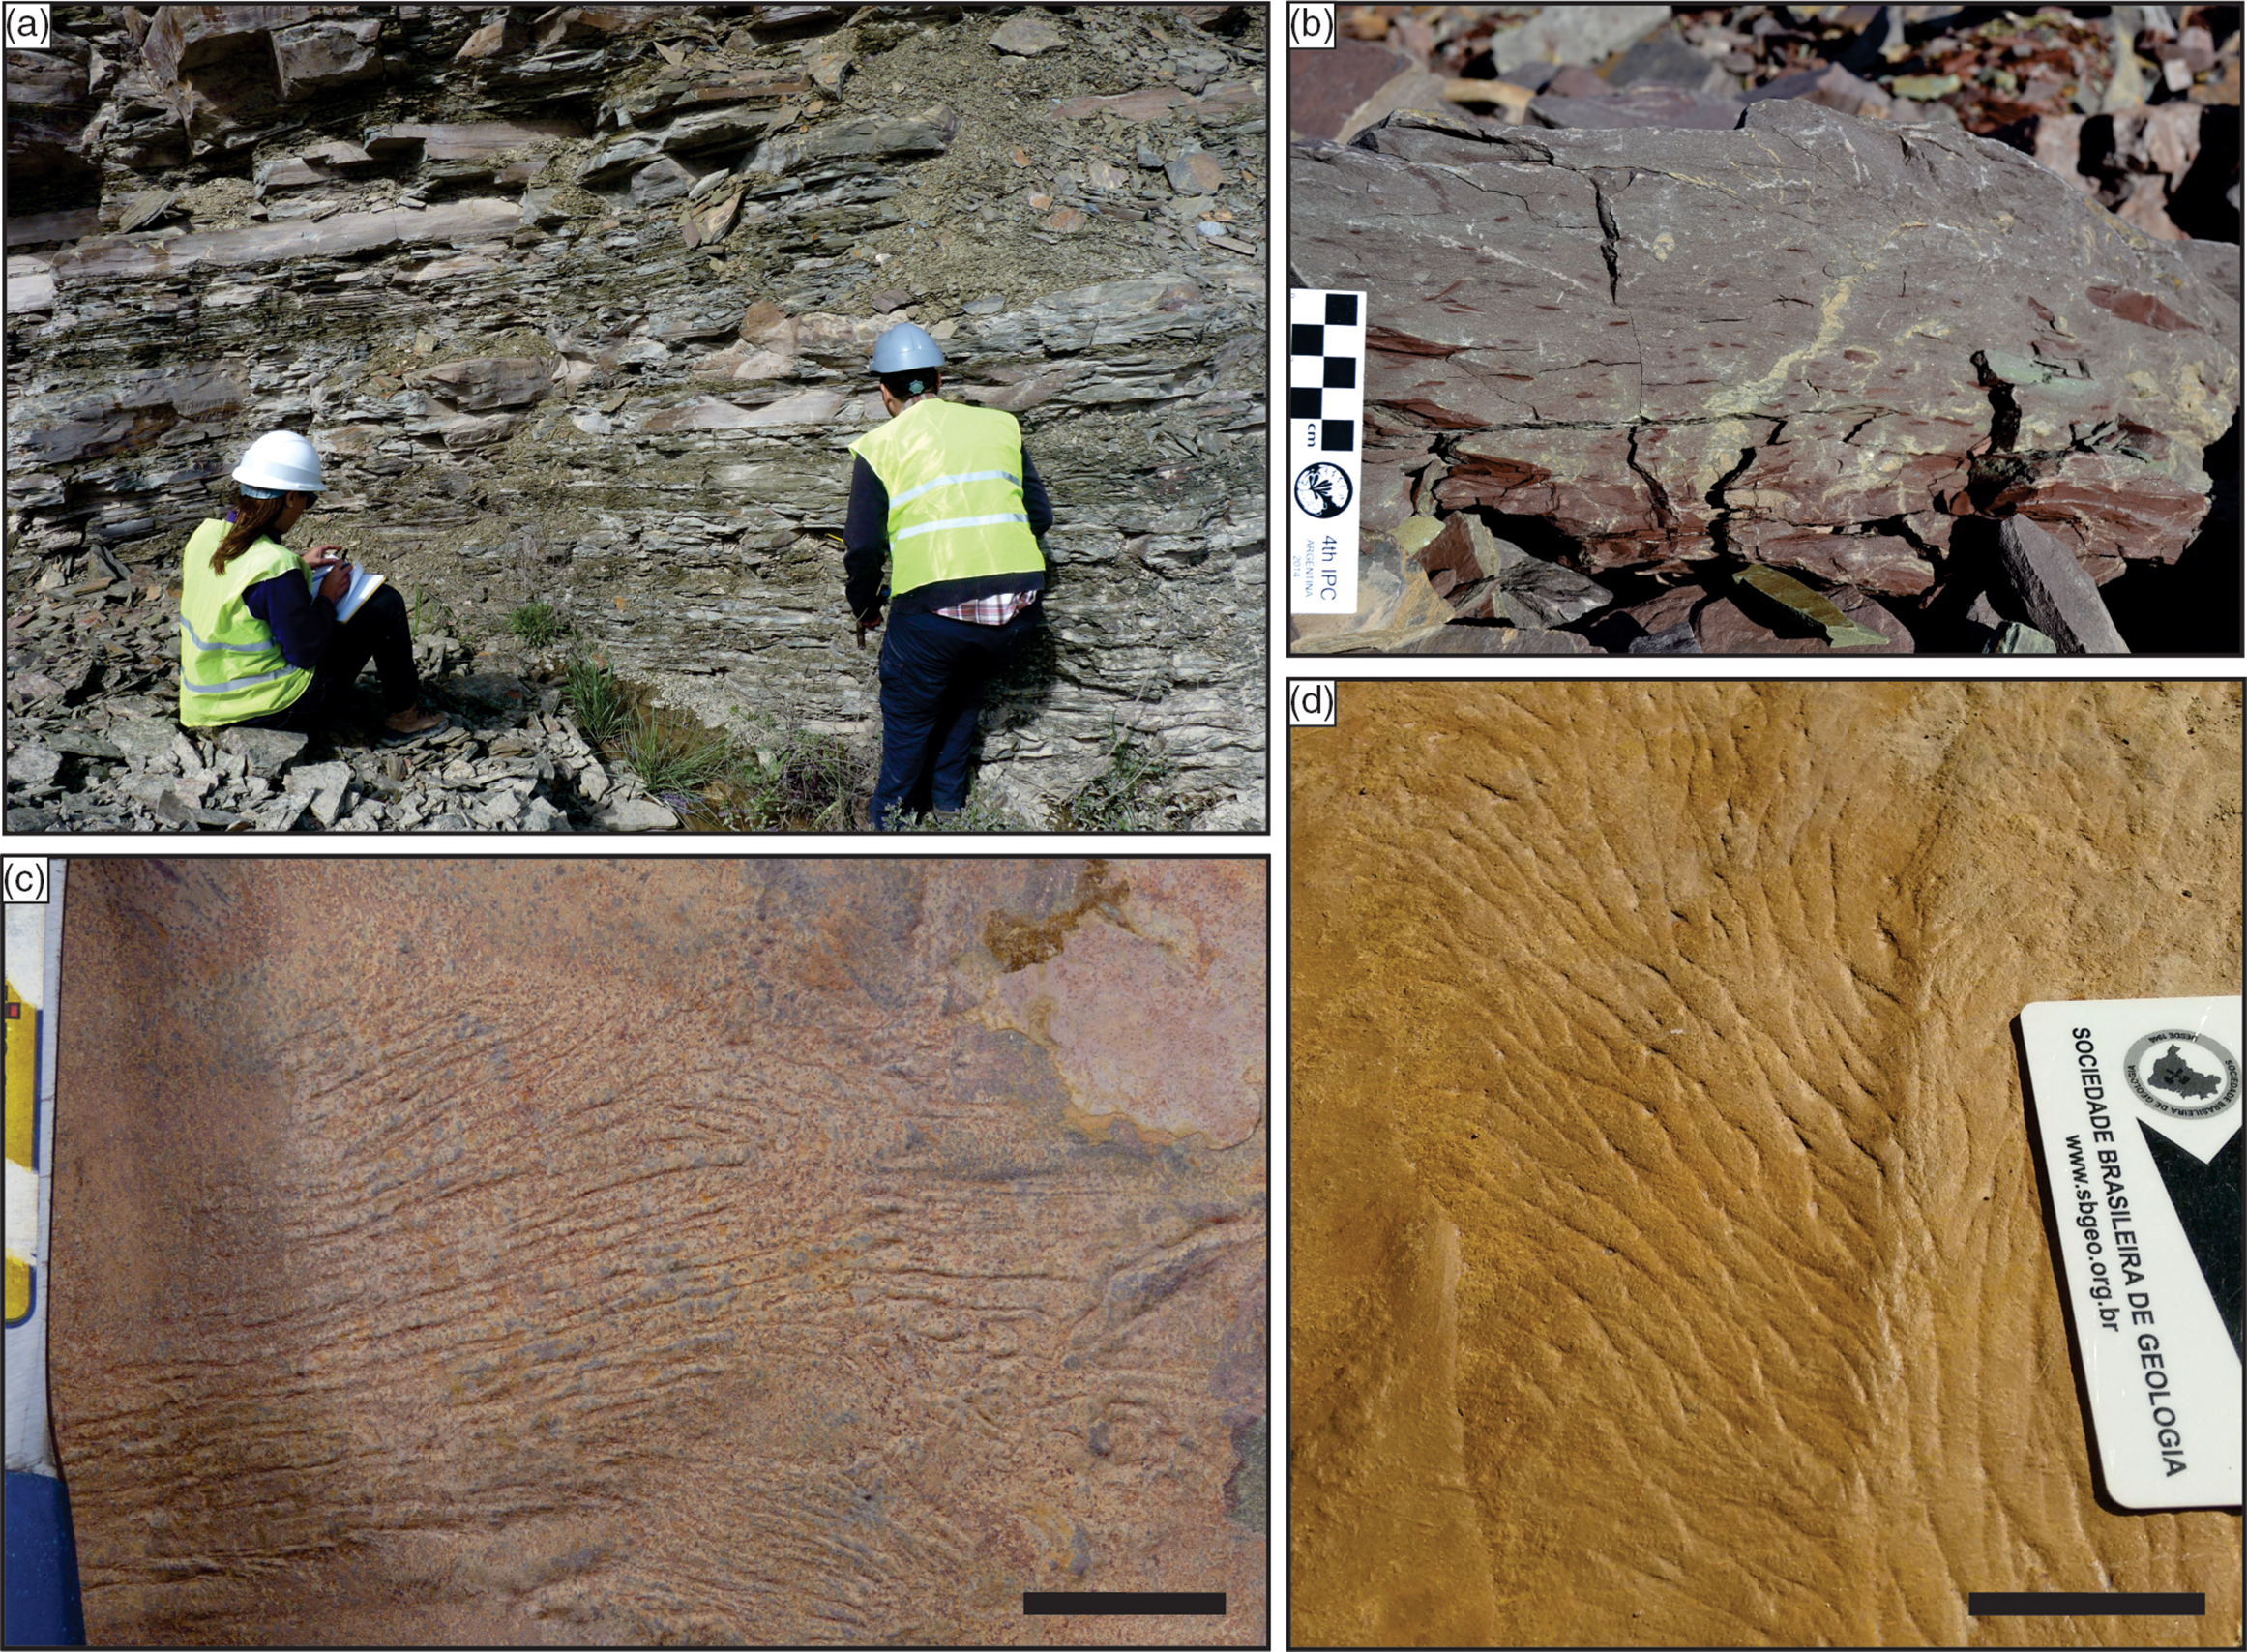 SIMPLE STRUCTURES AND COMPLEX STORIES: POTENTIAL MICROBIALLY INDUCED  SEDIMENTARY STRUCTURES IN THE EDIACARAN SERRA DE SANTA HELENA FORMATION,  BAMBUÍ GROUP, EASTERN BRAZIL